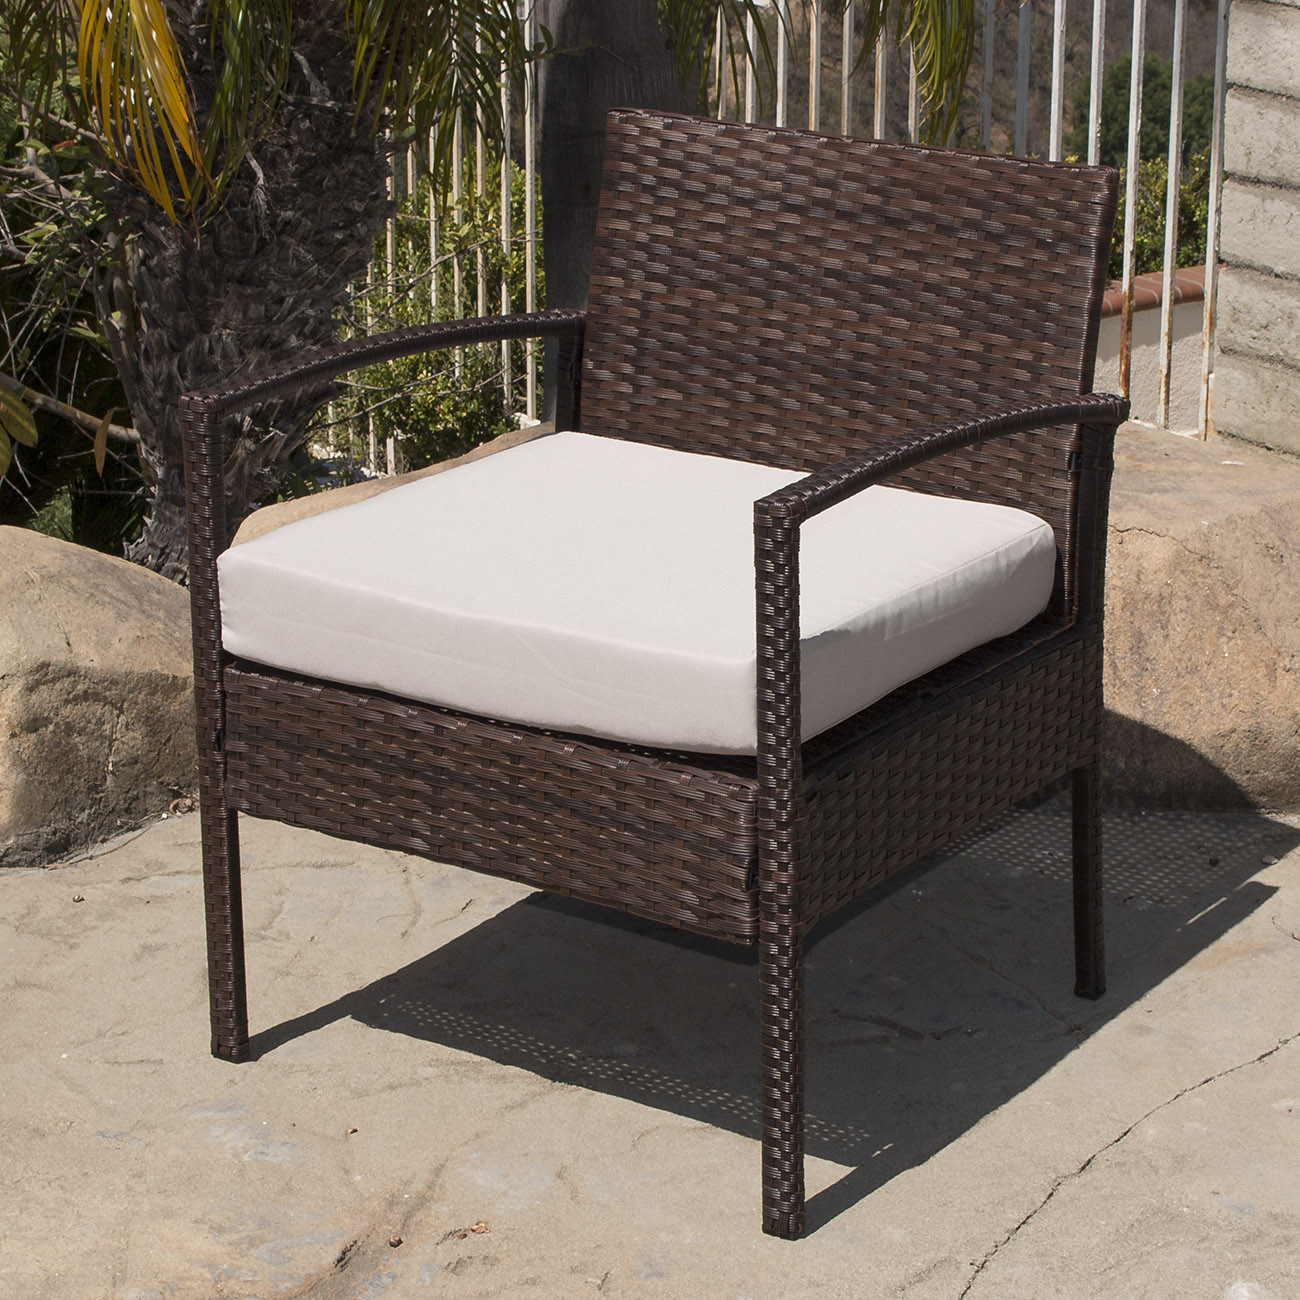 Best ideas about Wicker Patio Furniture
. Save or Pin 4PC Rattan Wicker Patio Furniture Set Sofa Chair Table Now.